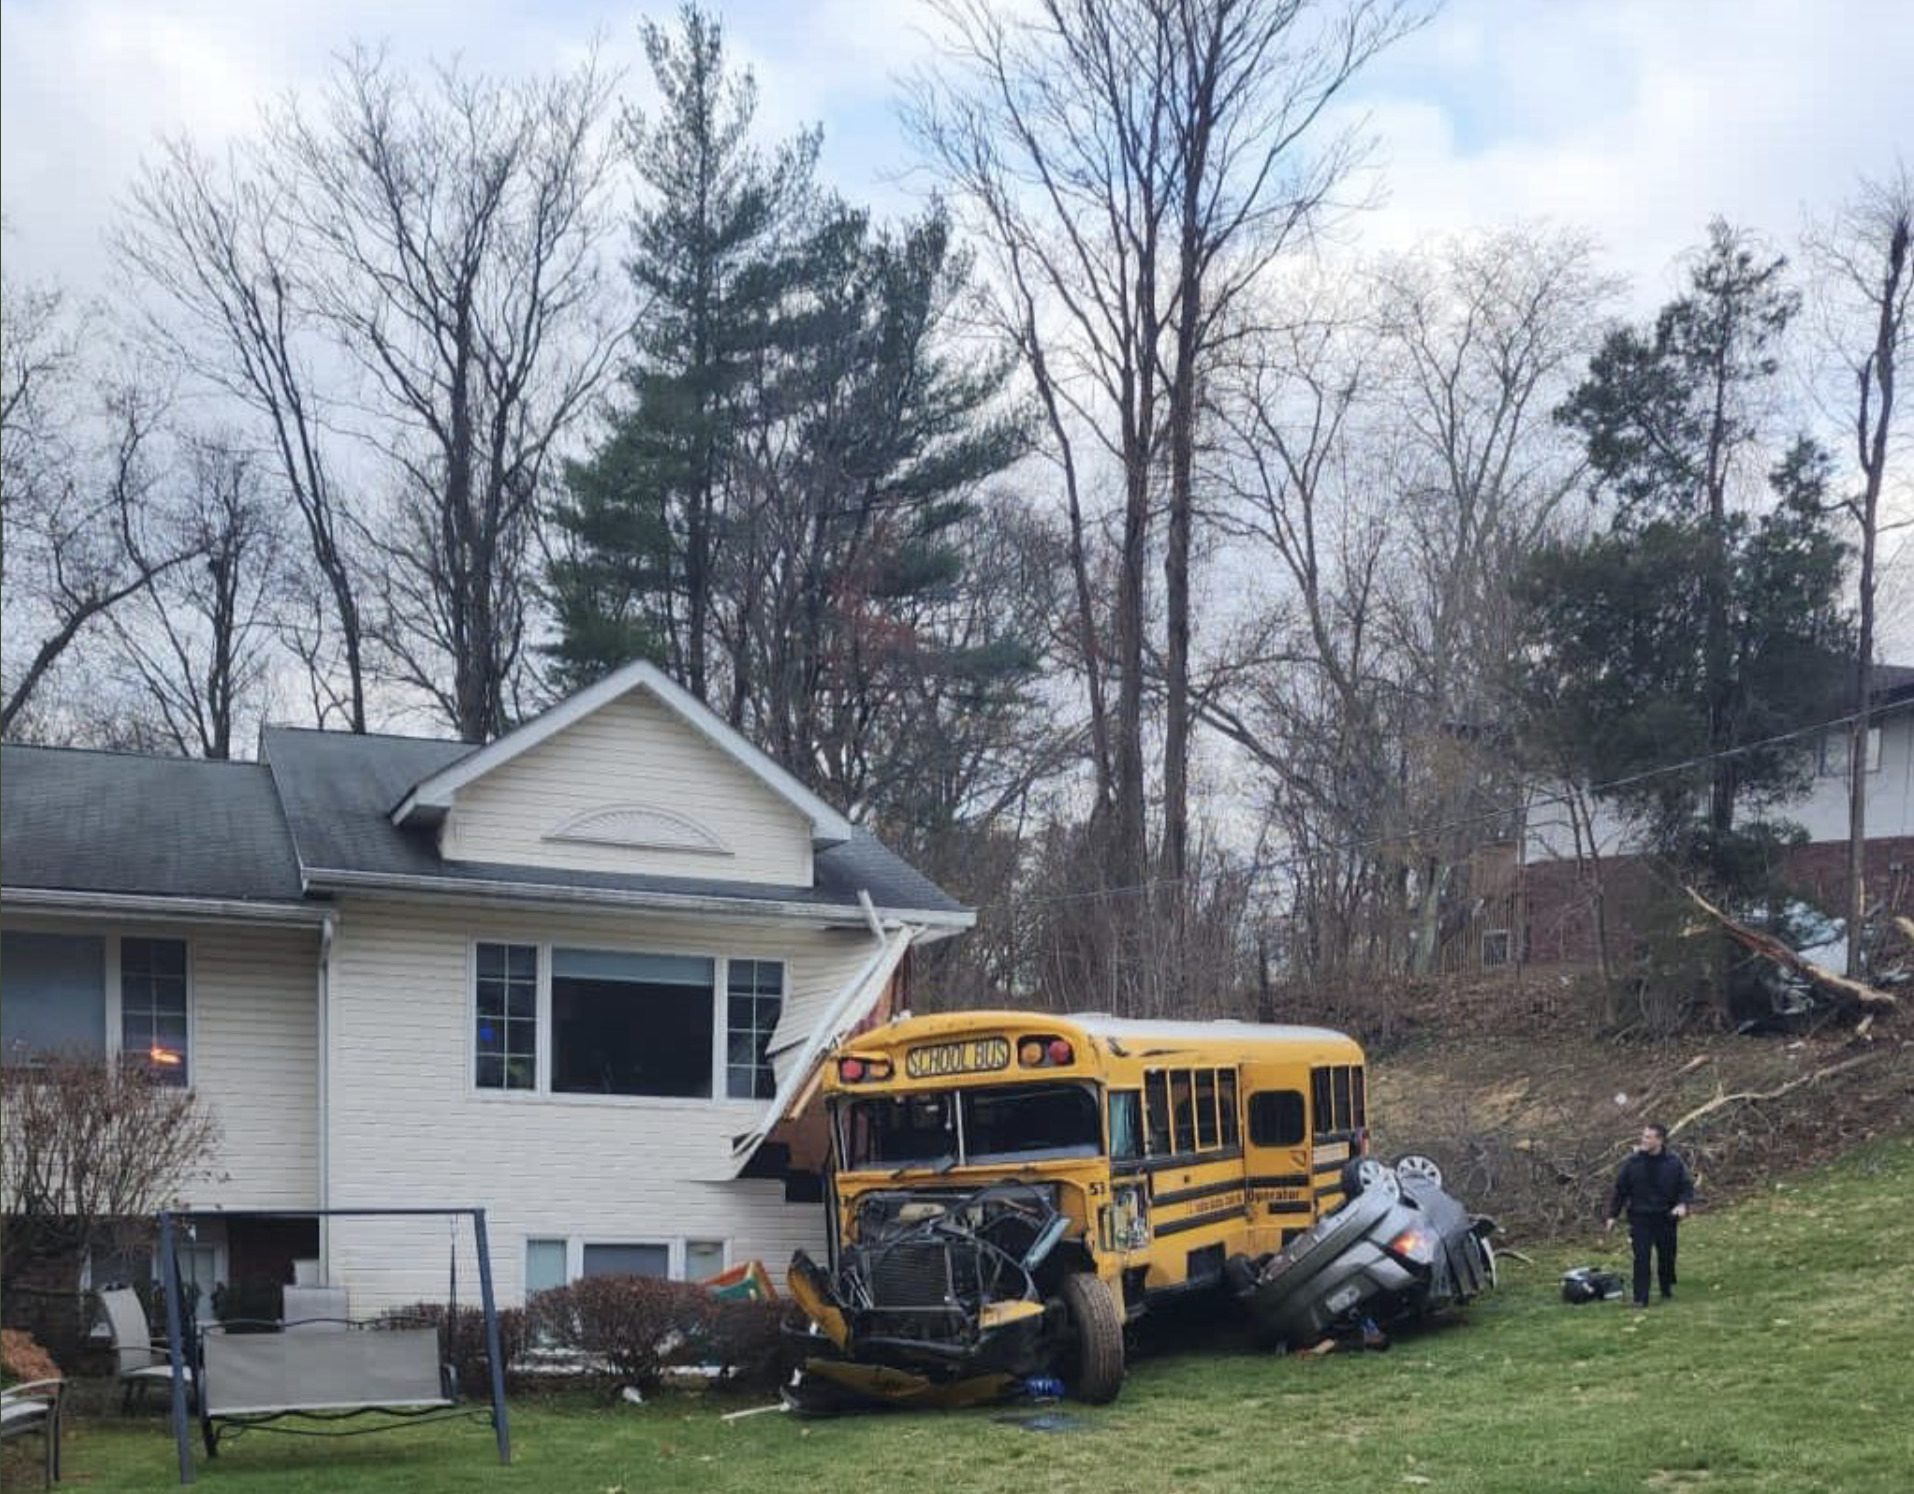 School Bus Filled With Children Crashed into House in Spring Valley, NY, Serious Injuries